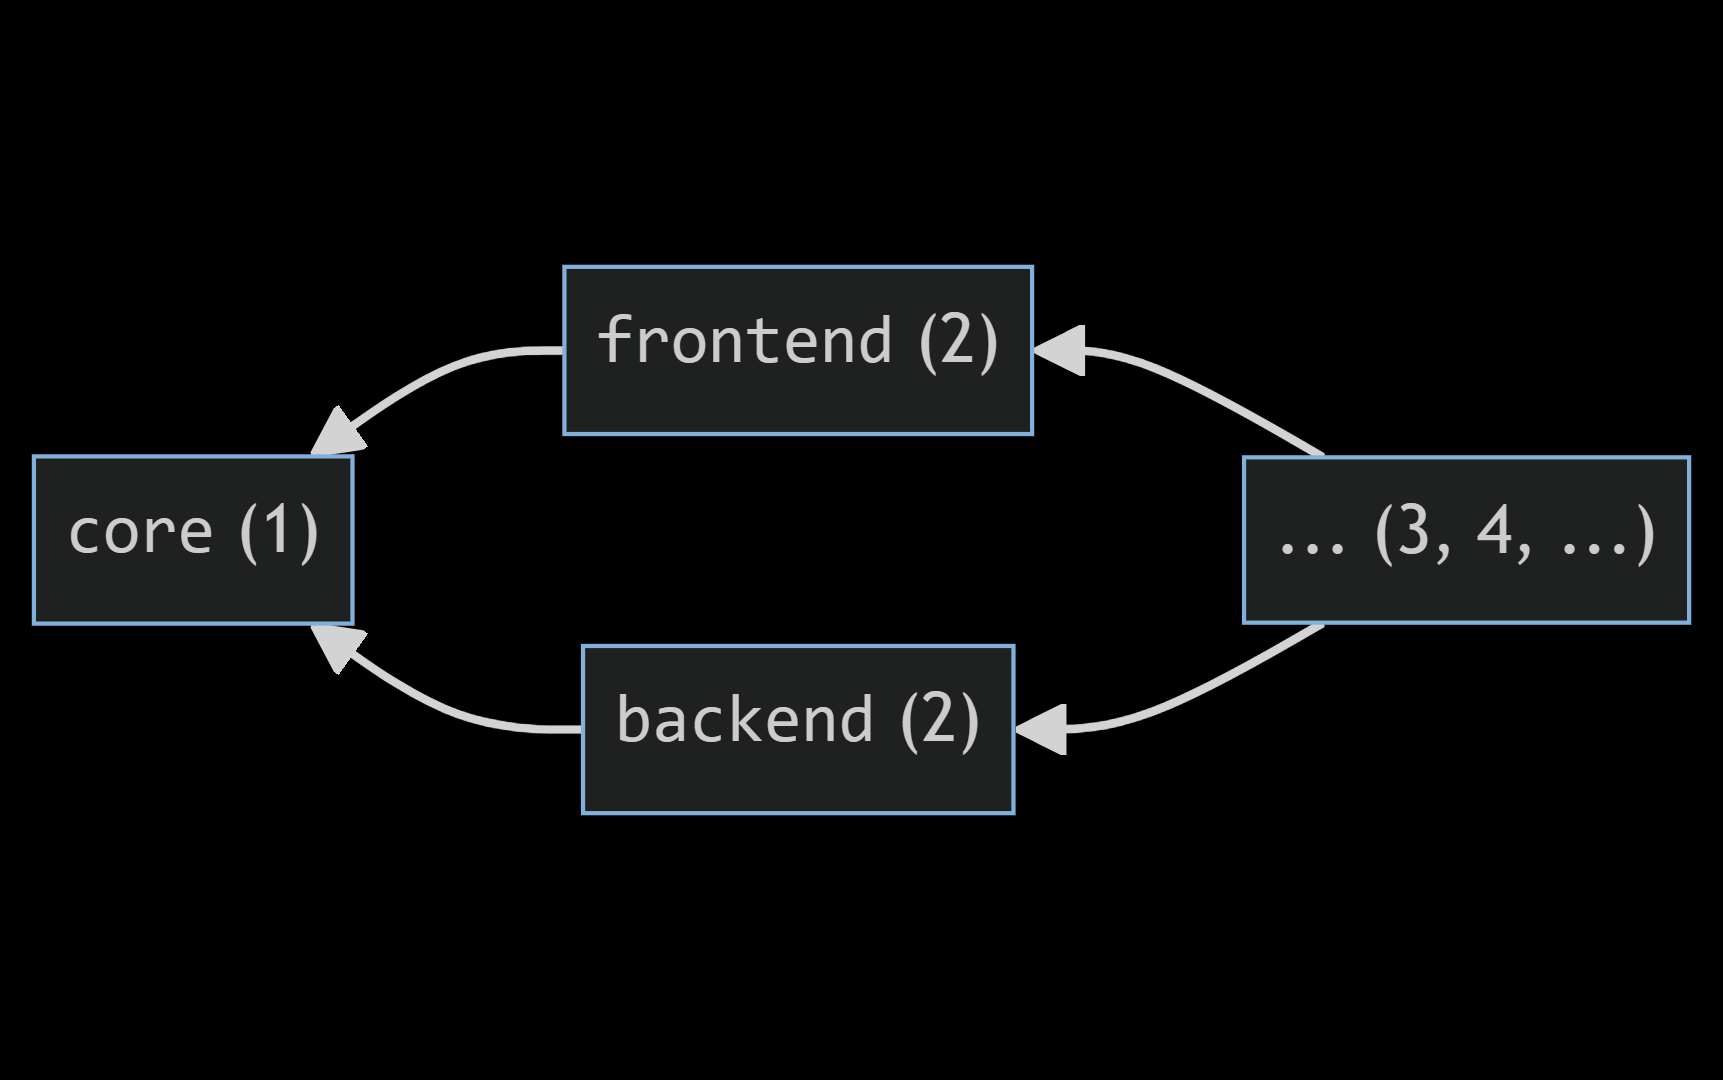 frontend and backend point to core, other stuff might point to each of those